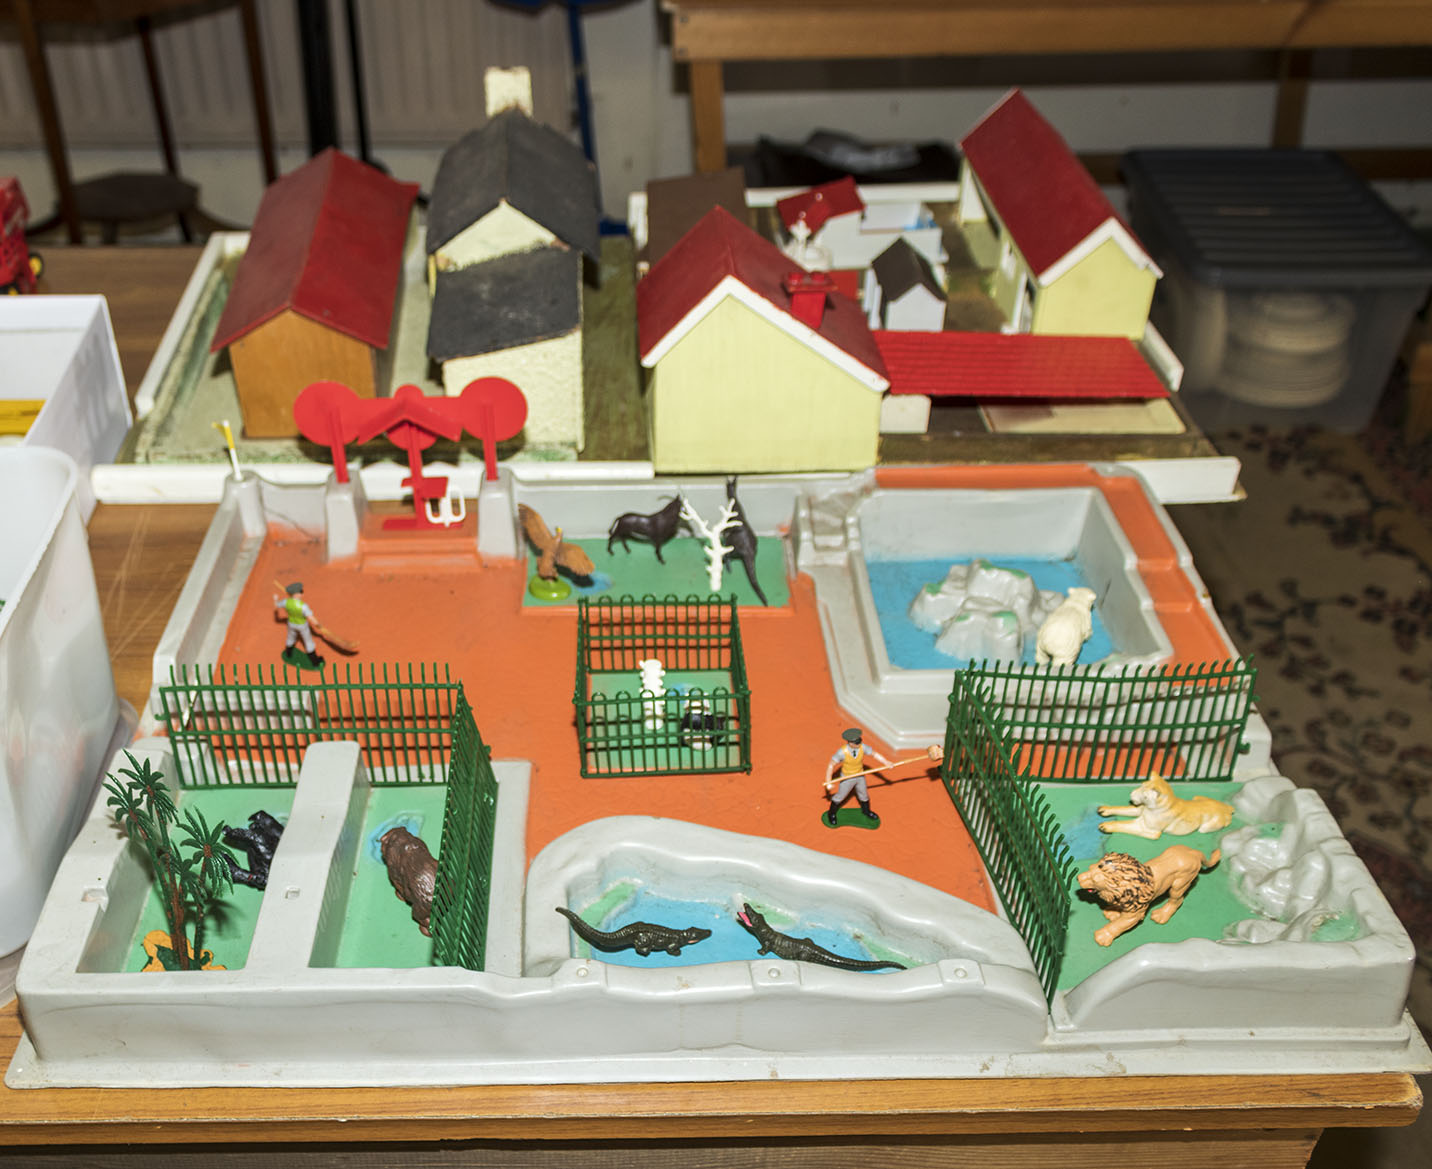 Britains model Zoo, Riding School and Farmyard including bases, buildings, animals and farm - Image 5 of 8